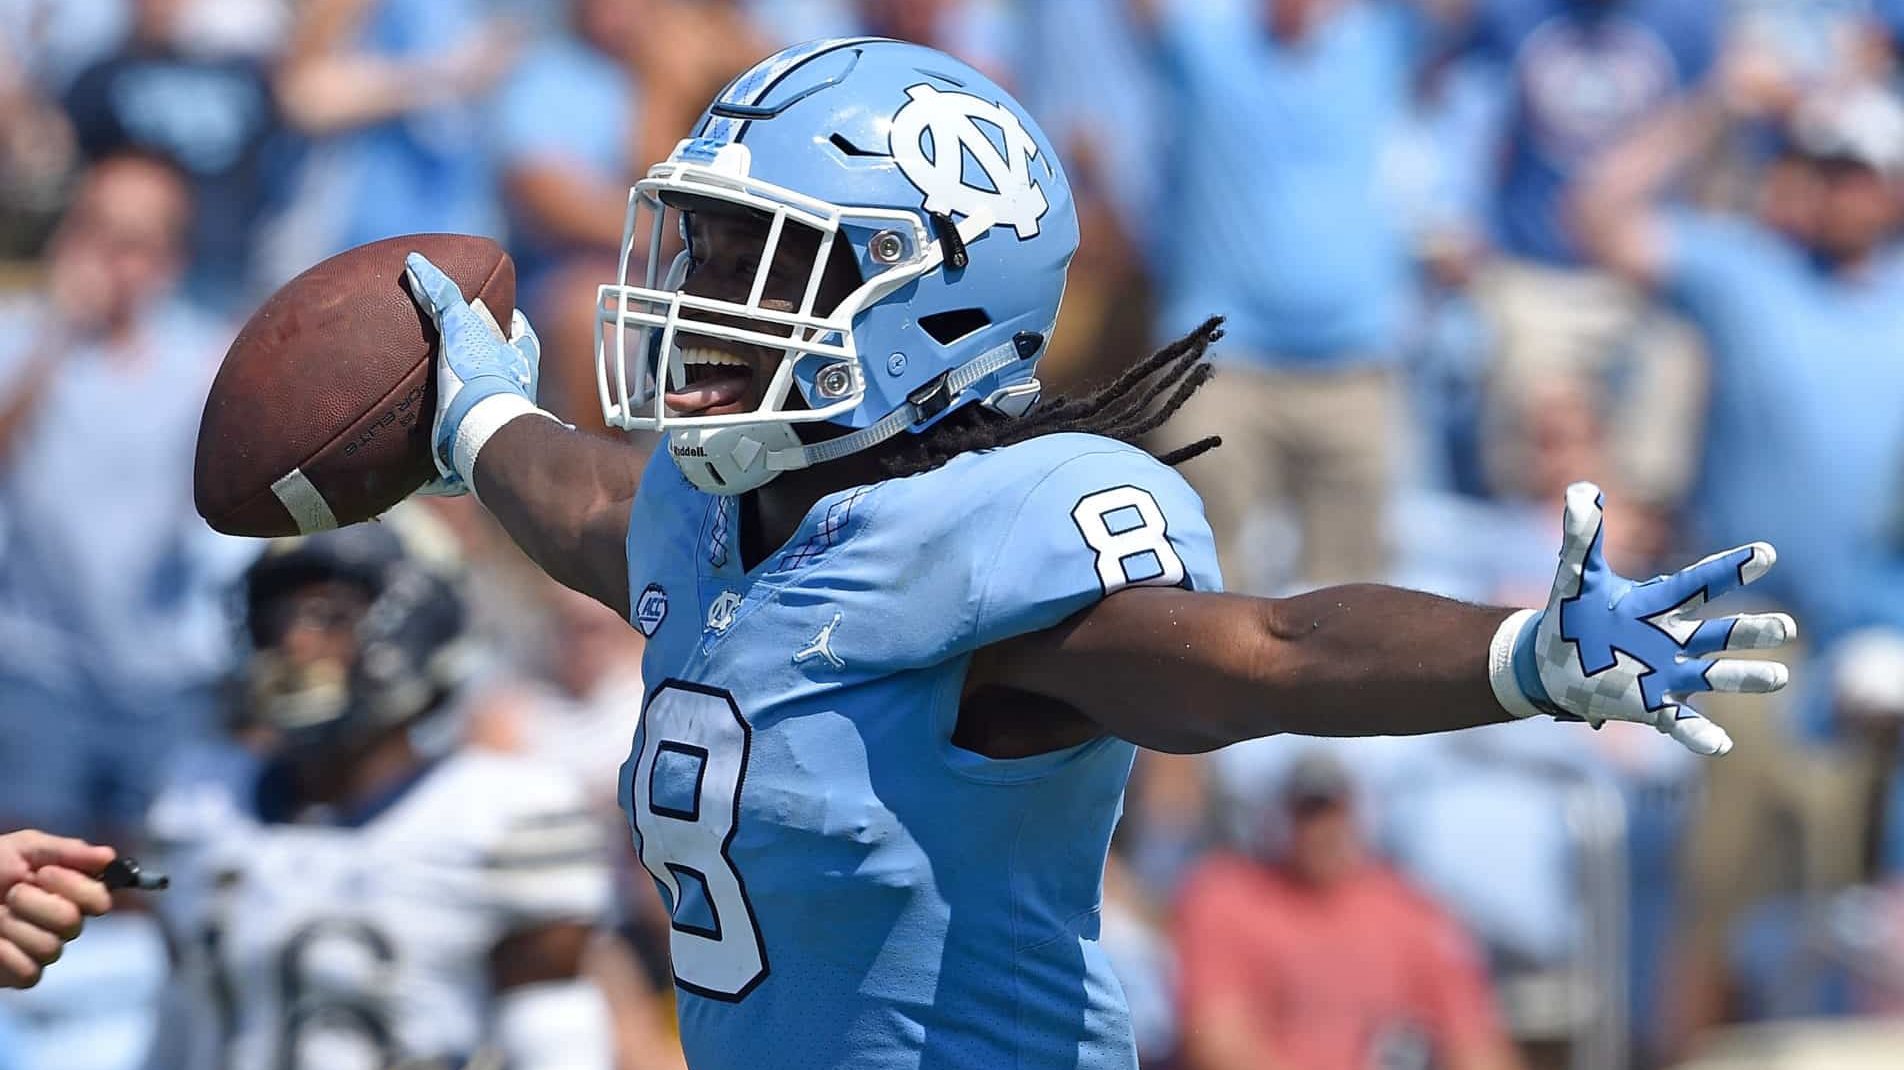 CHAPEL HILL, NC - SEPTEMBER 22: Michael Carter #8 of the North Carolina Tar Heels reacts after scoring a touchdown against the Pittsburgh Panthers during their game at Kenan Stadium on September 22, 2018 in Chapel Hill, North Carolina.